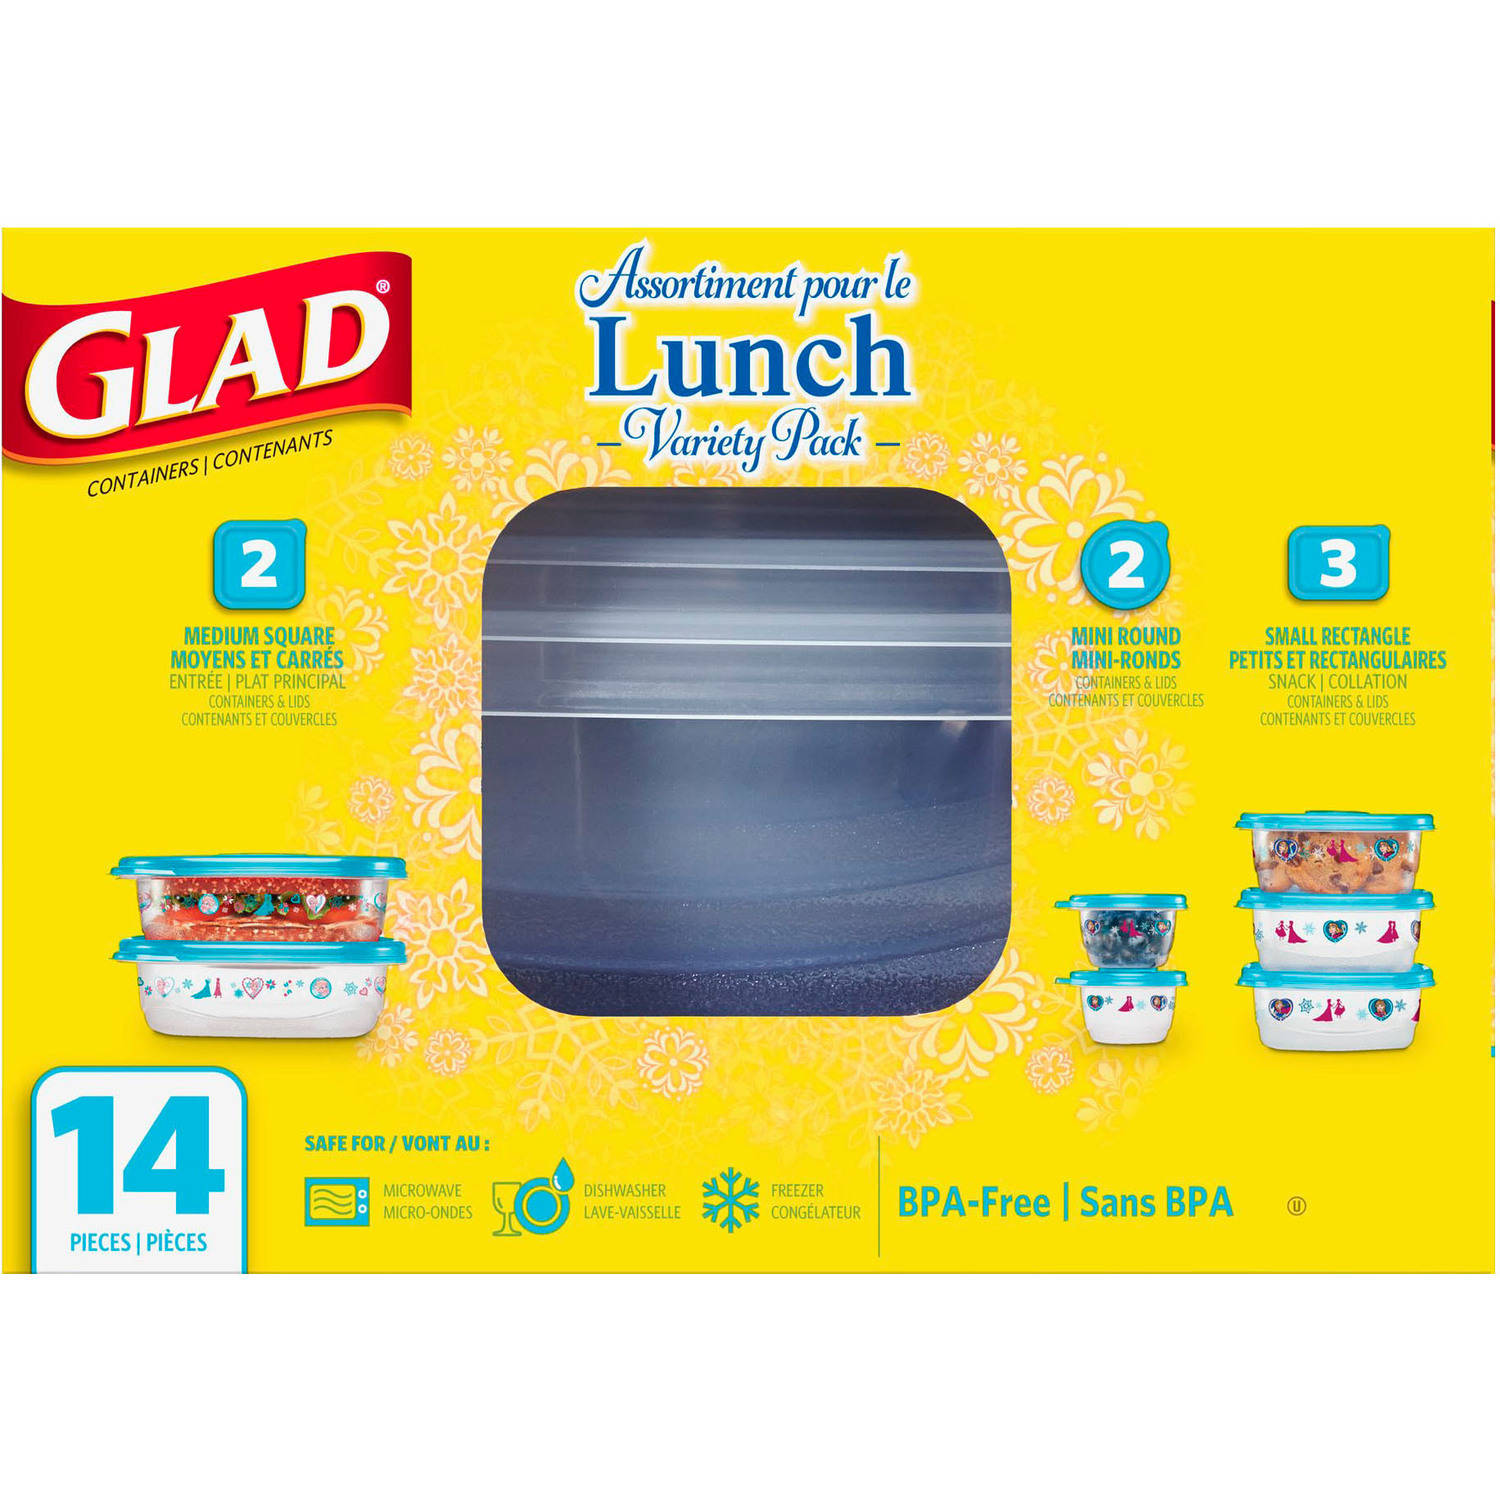 Glad Lunch Variety Pack Disney Frozen Food Storage Containers, BPA Free, 14 pk - image 5 of 8